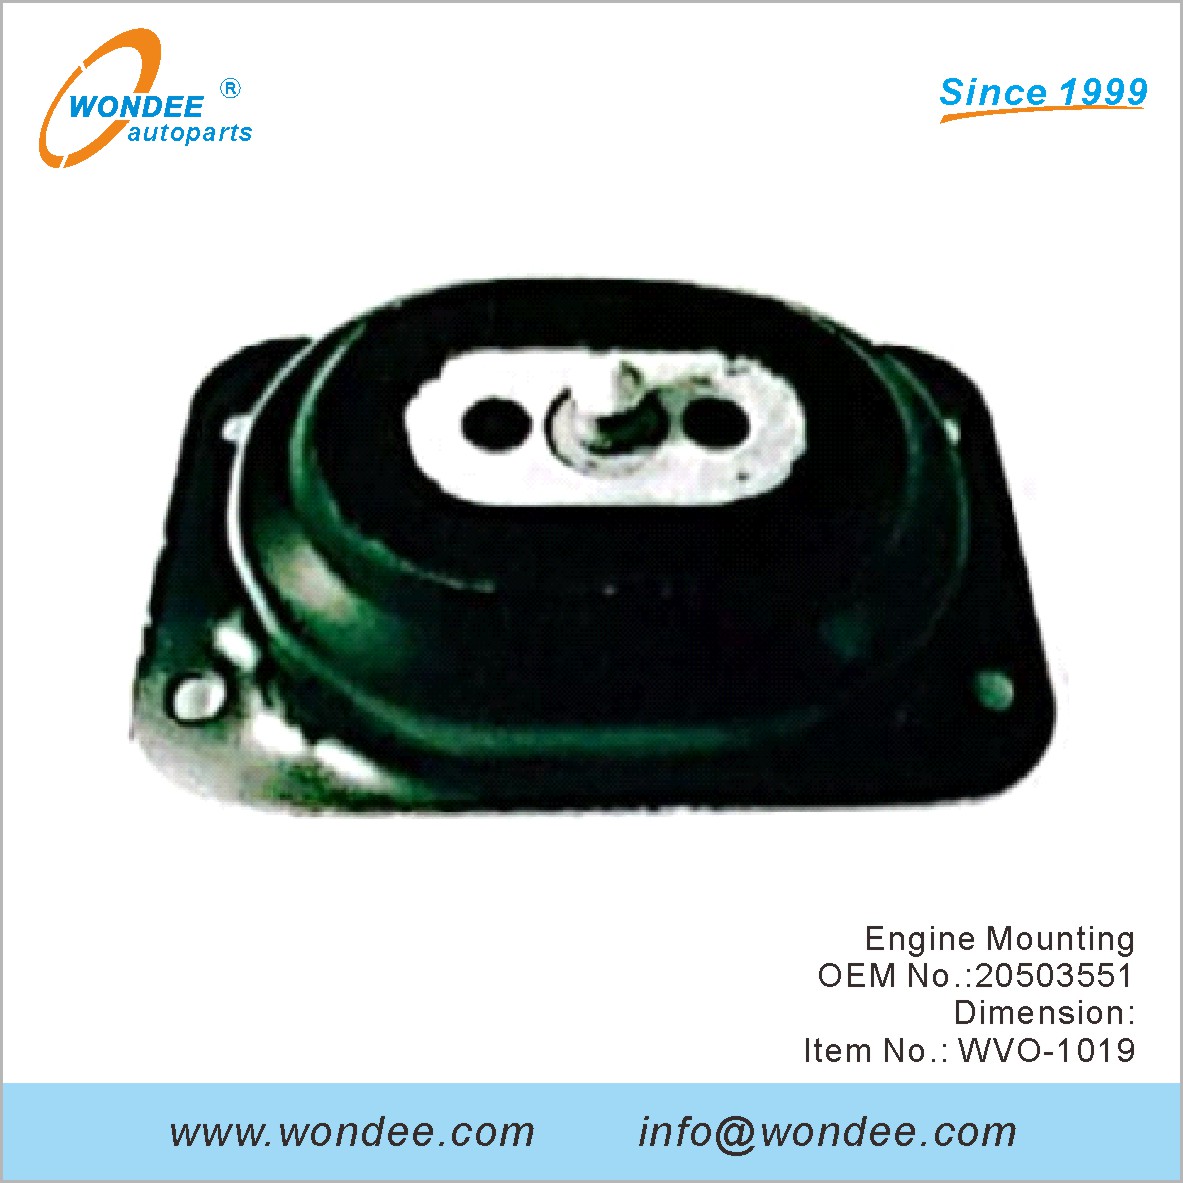 Engine Mounting OEM 20503551 for Volvo from WONDEE